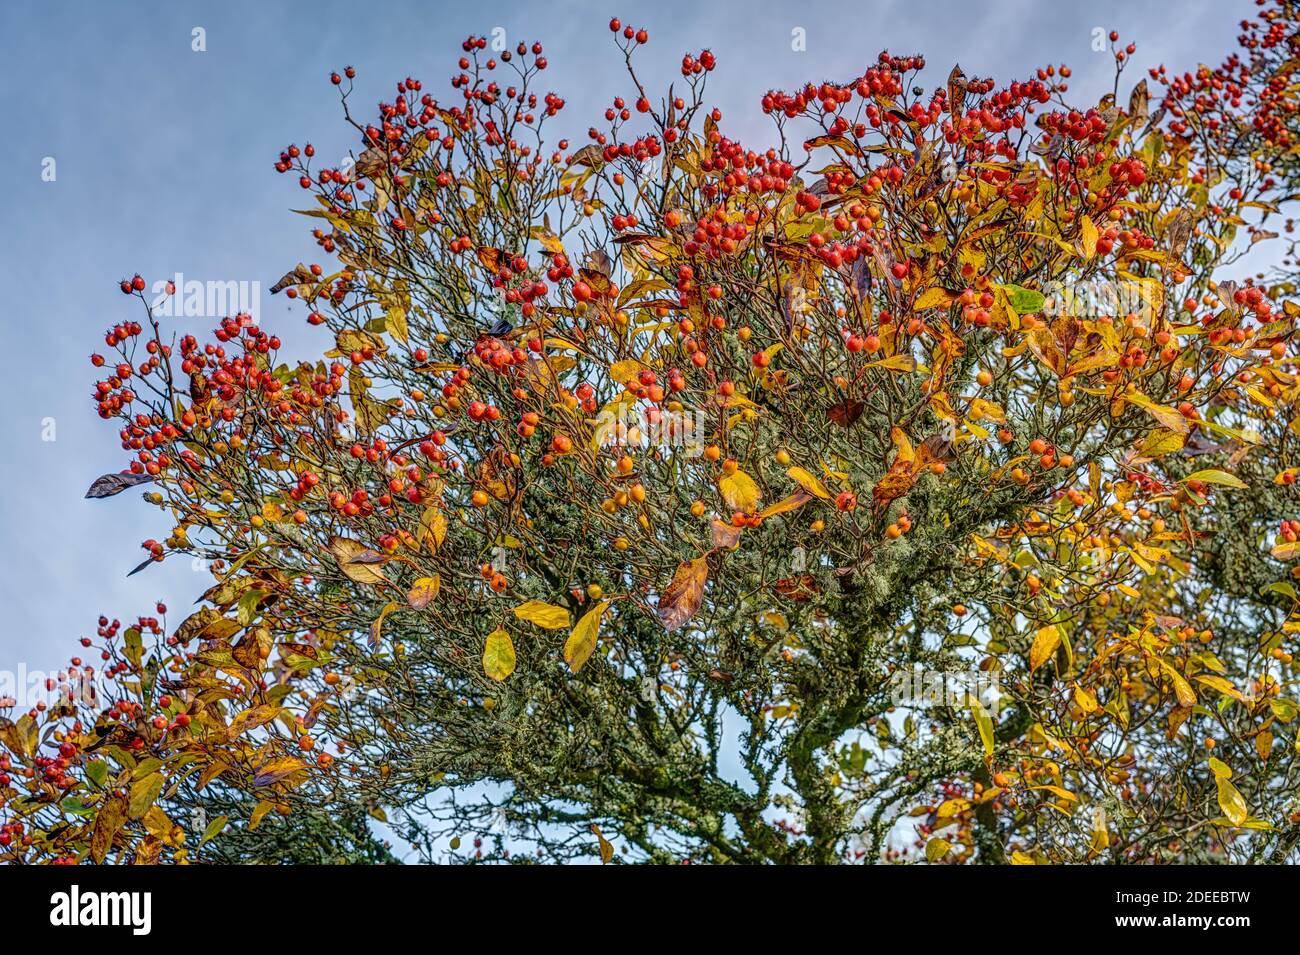 Beautiful maturing red berries on an old Whitebeam Mountain Ash tree against a November blue sky providing food for the bird population in England. Stock Photo